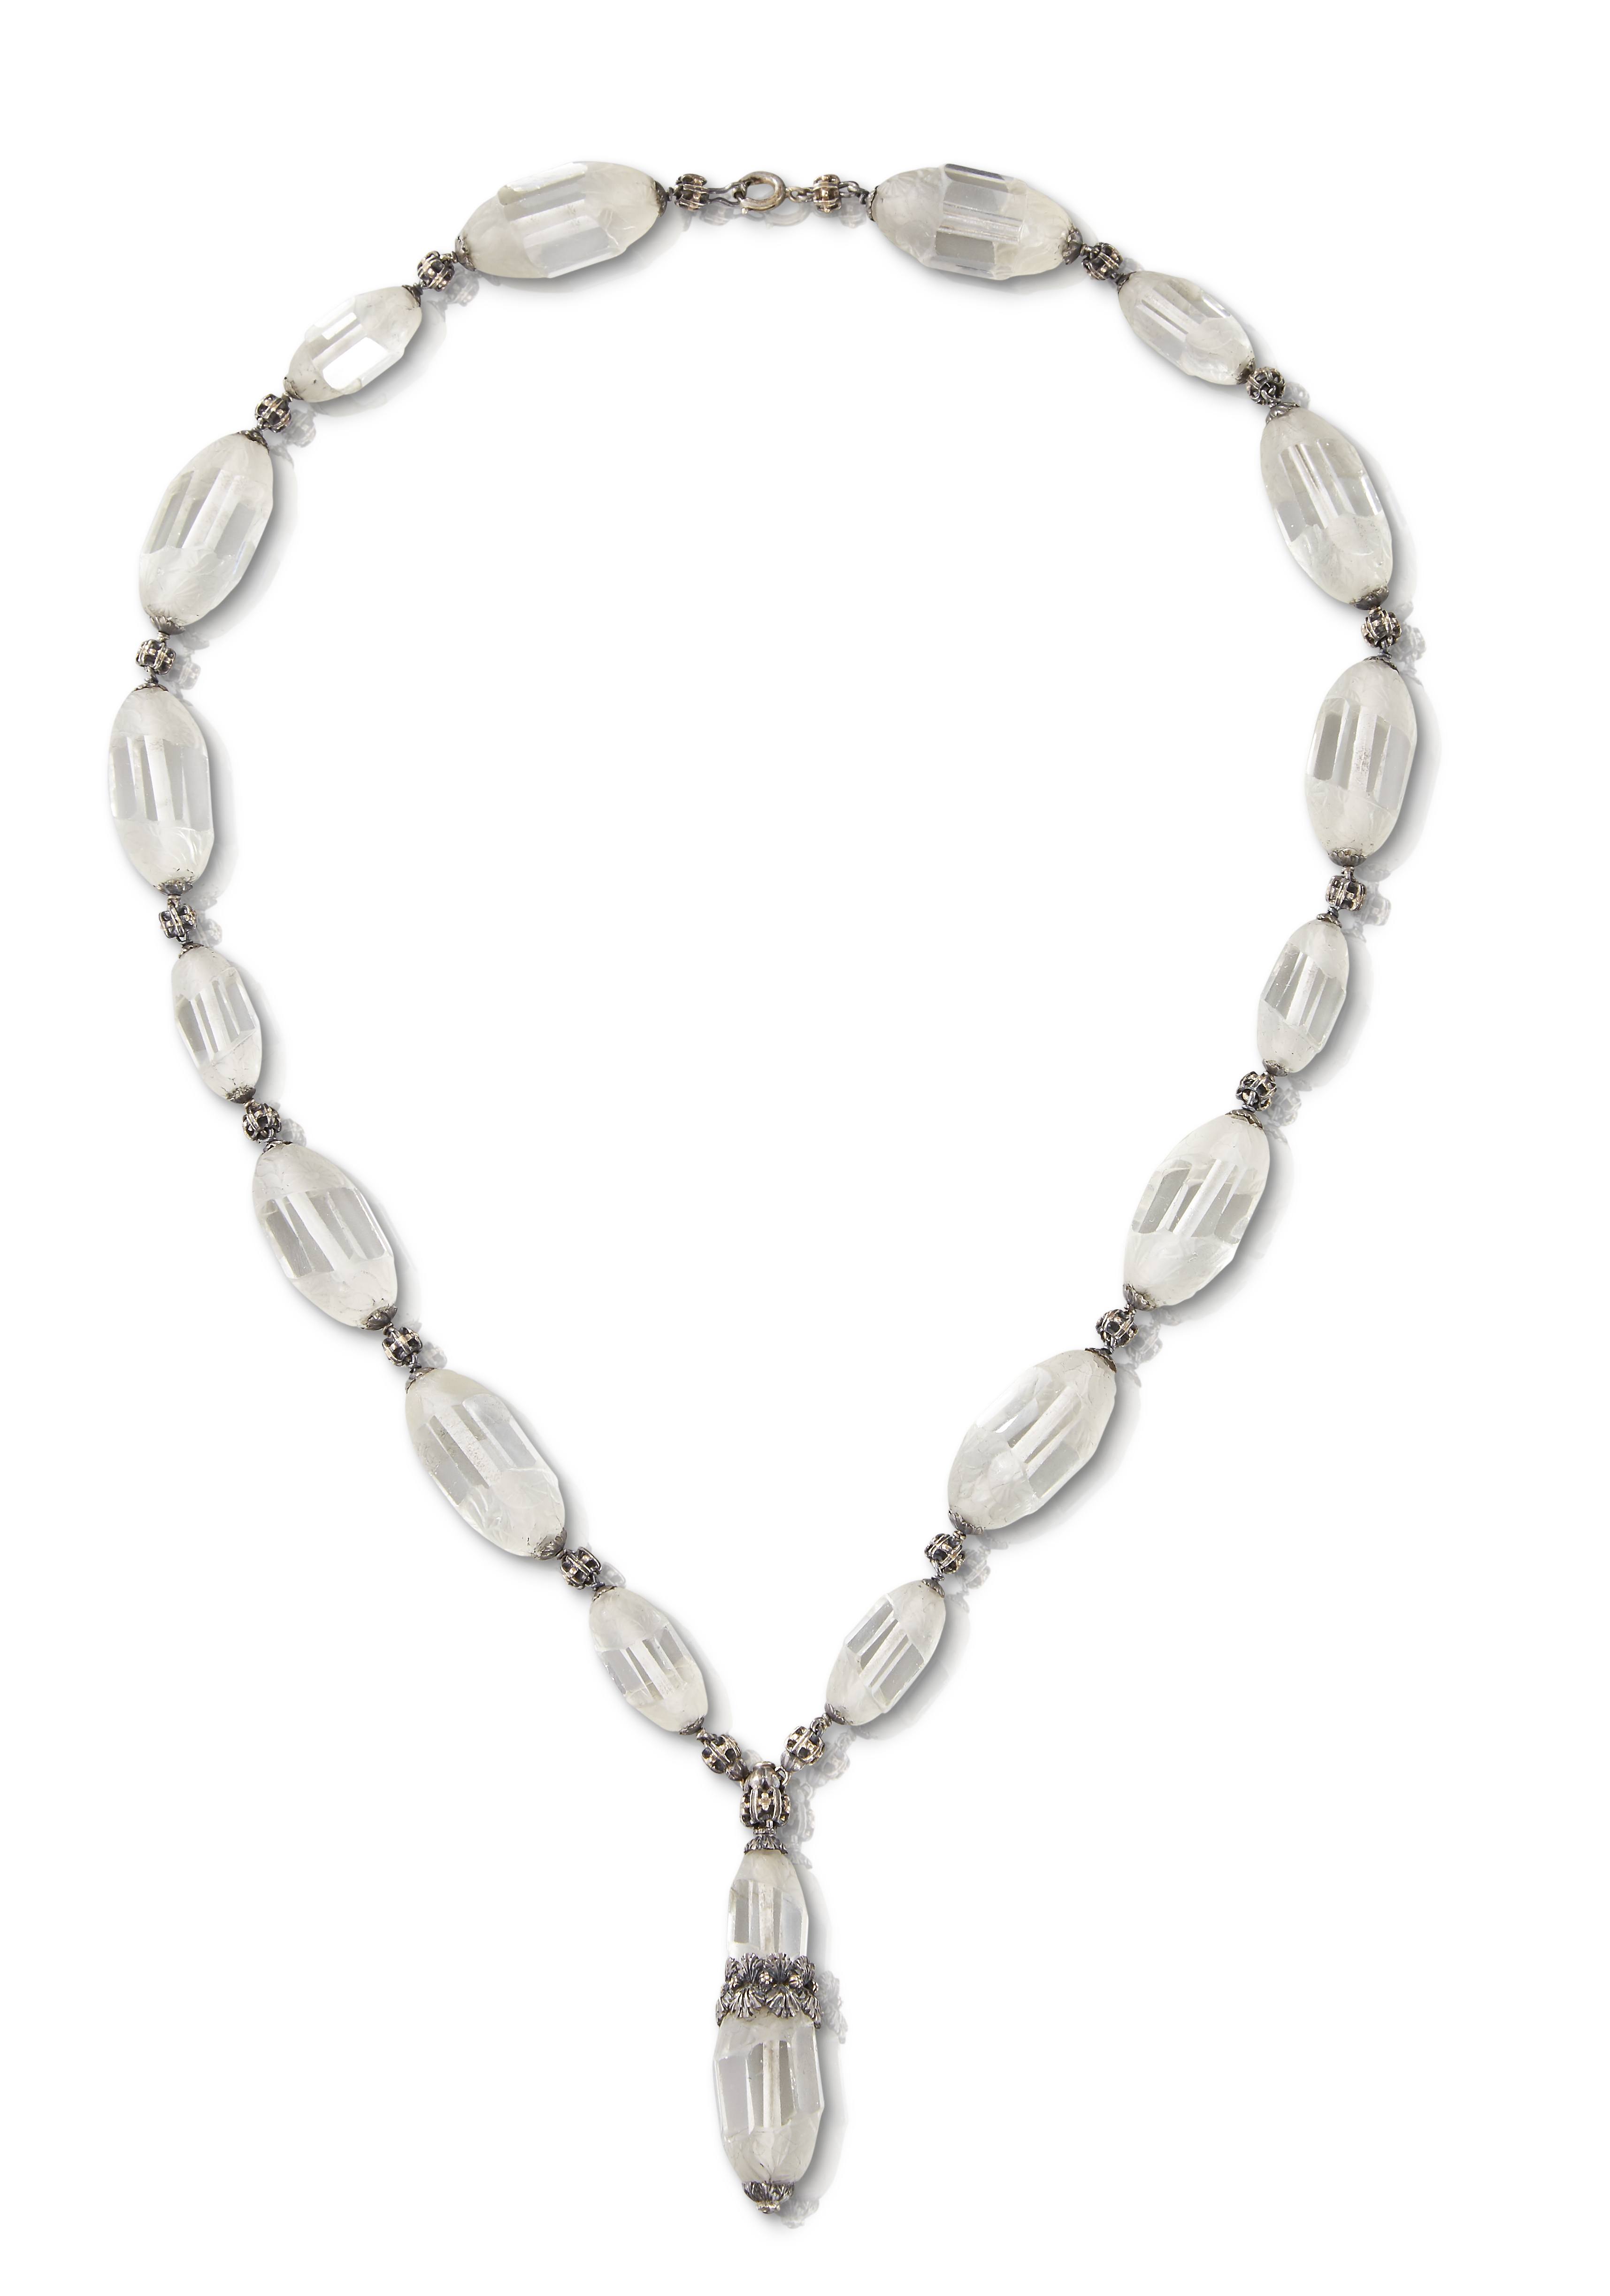 The company’s Vintage Collection includes this necklace of sculpted crystal beads, created by Mario Buccellati. The piece was a gift for the Italian writer Gabriele d’Annunzio to present to his lover, the Italian actress Eleonora Duse